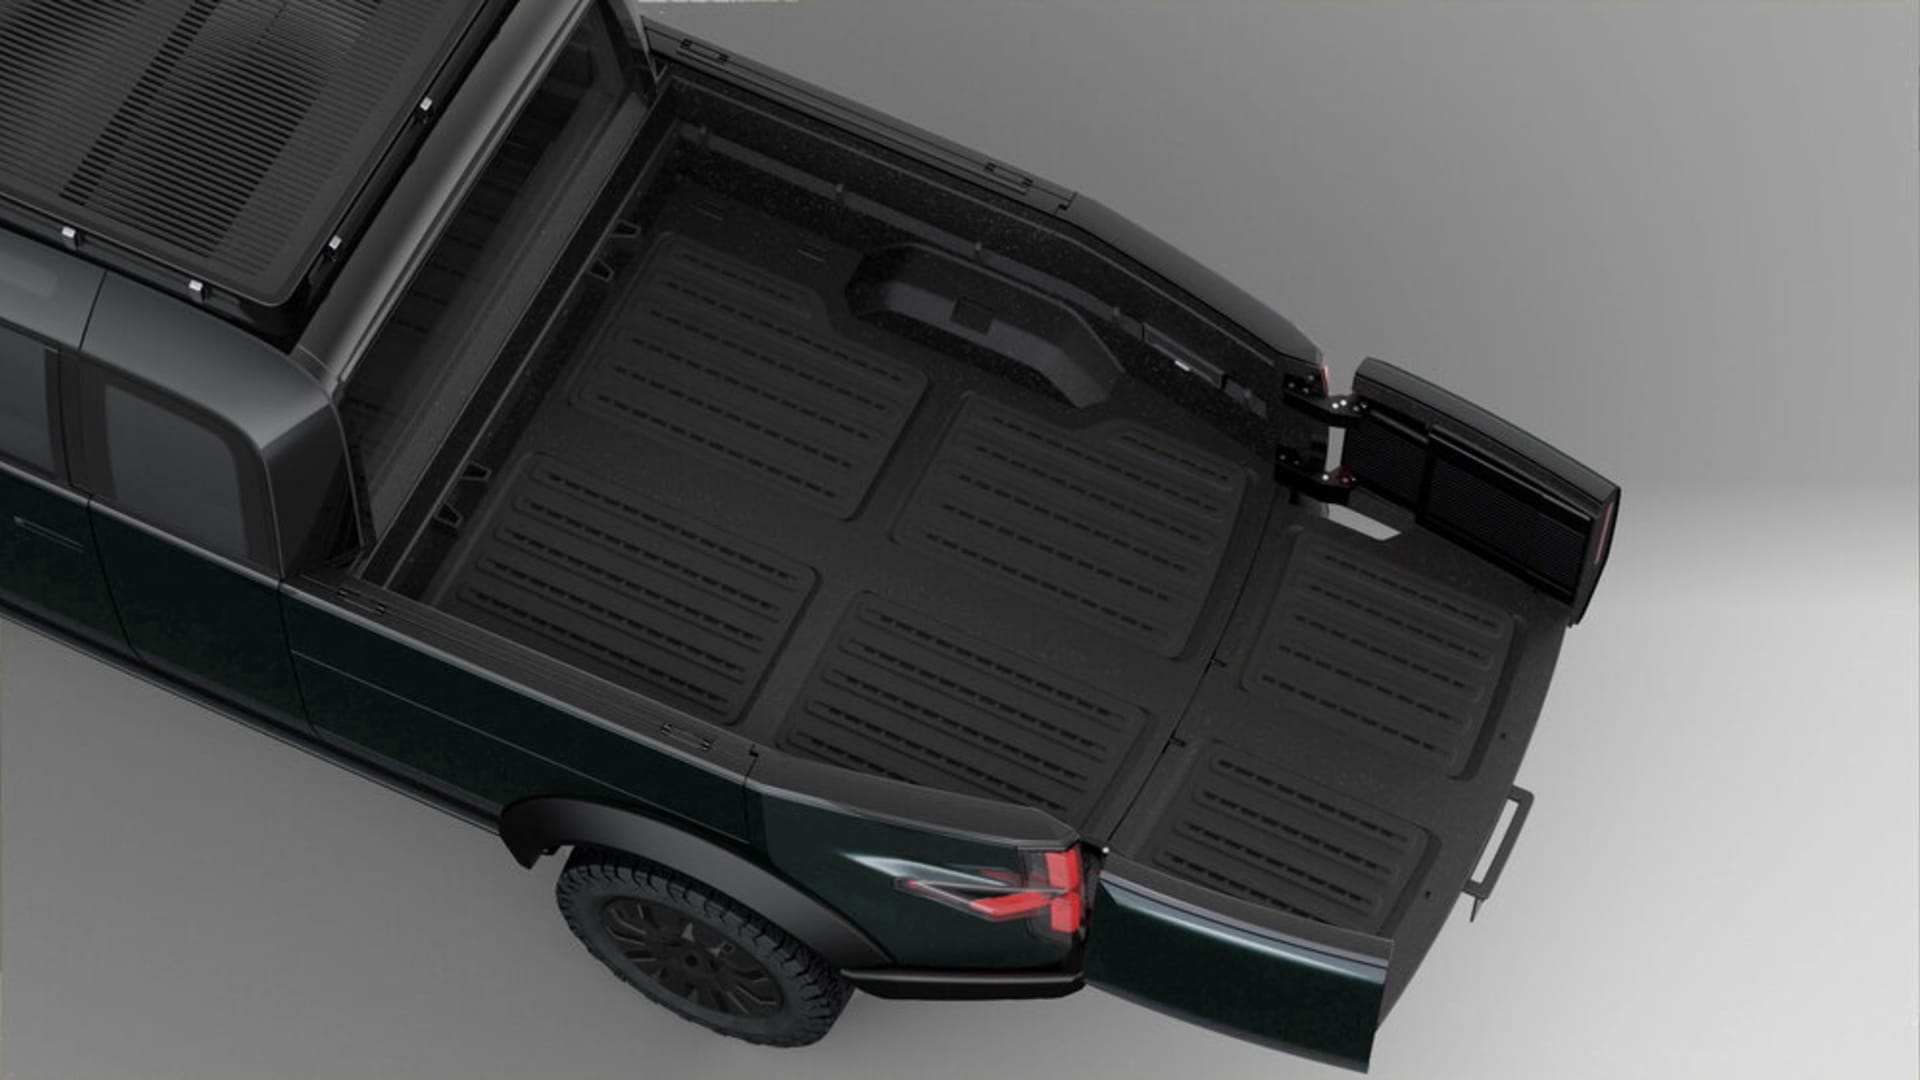 Canoo's new electric pickup features an extendable rear cargo bed.